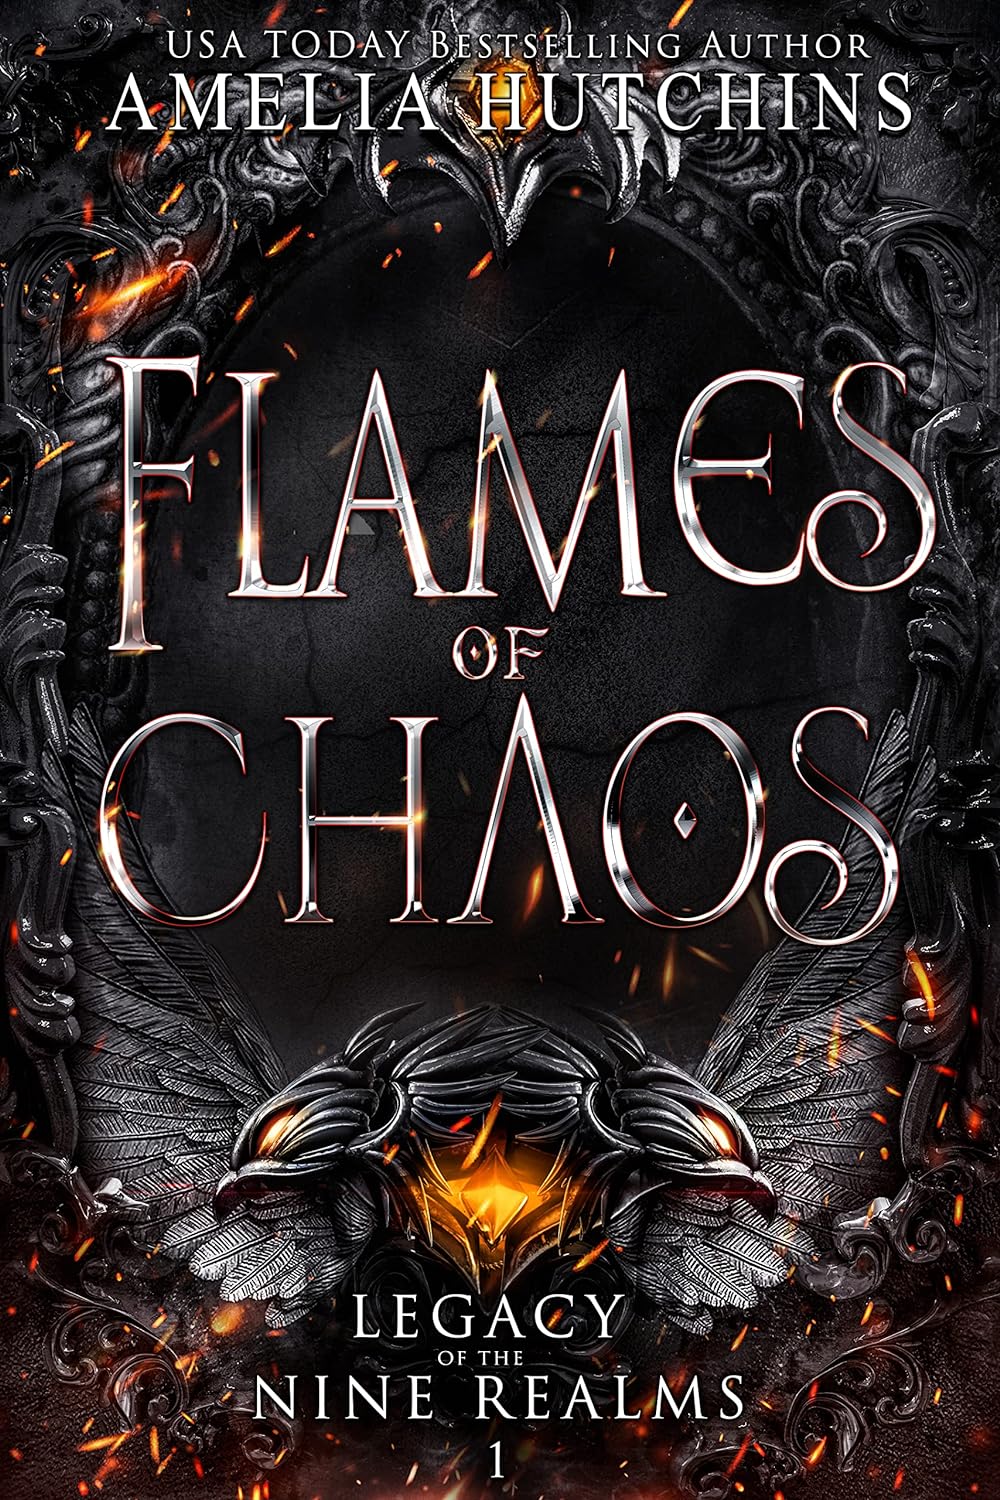 Flames of Chaos (Legacy of the Nine Realms Book 1) by Amelia Hutchins